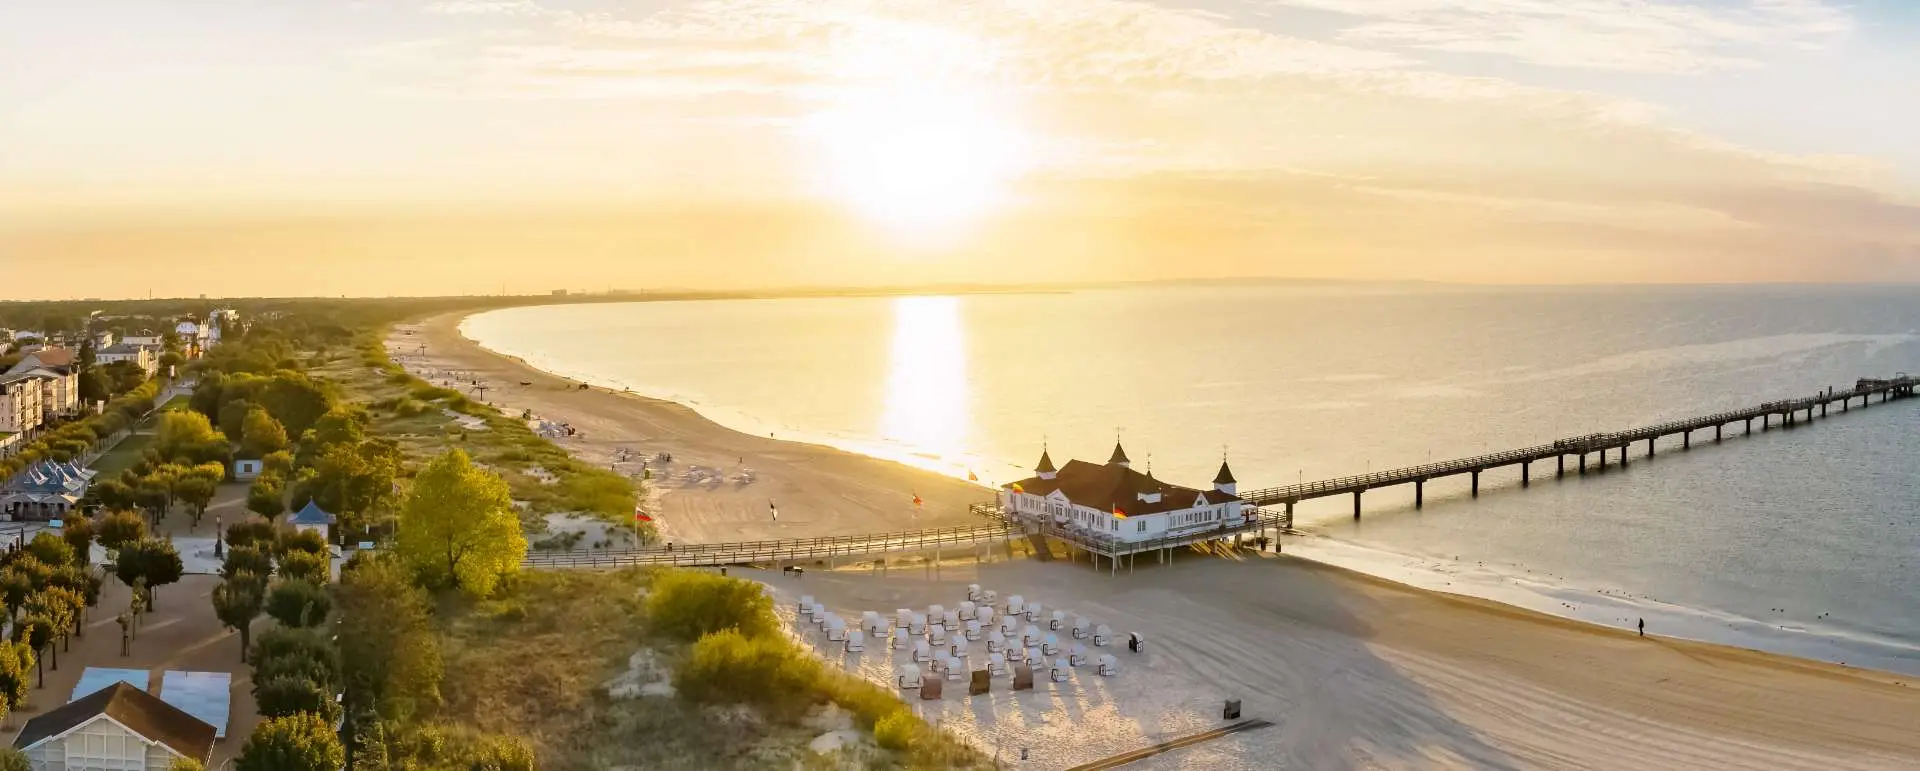 Usedom - the destination for group hotel for music groups